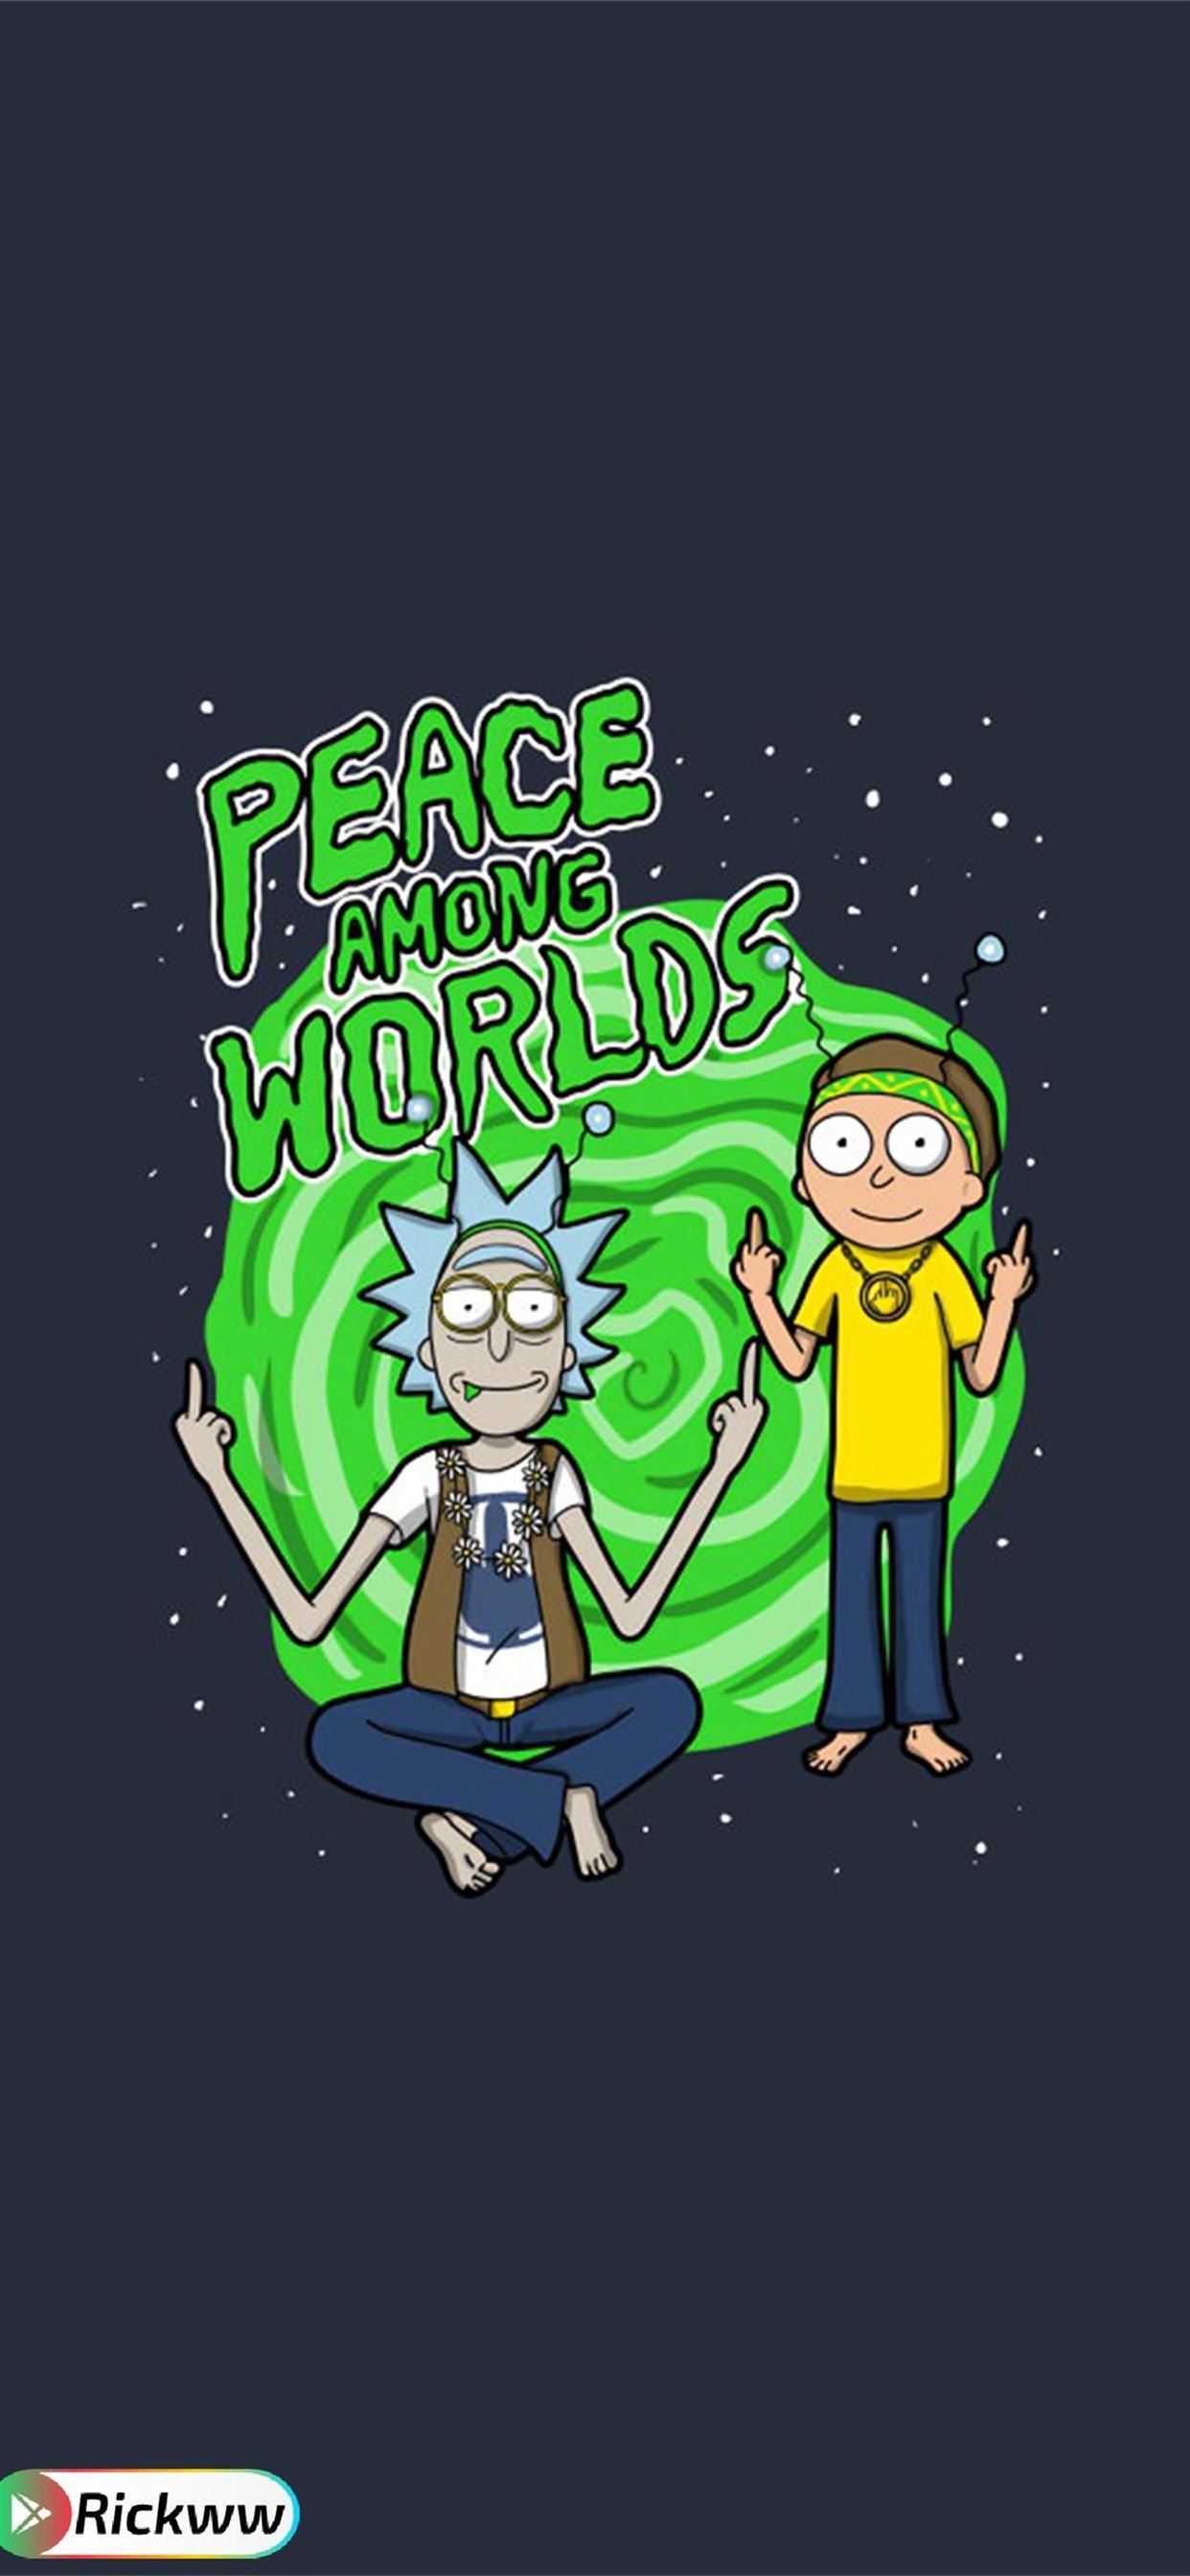 rick and morty iphone iPhone 11 Wallpapers Free Download